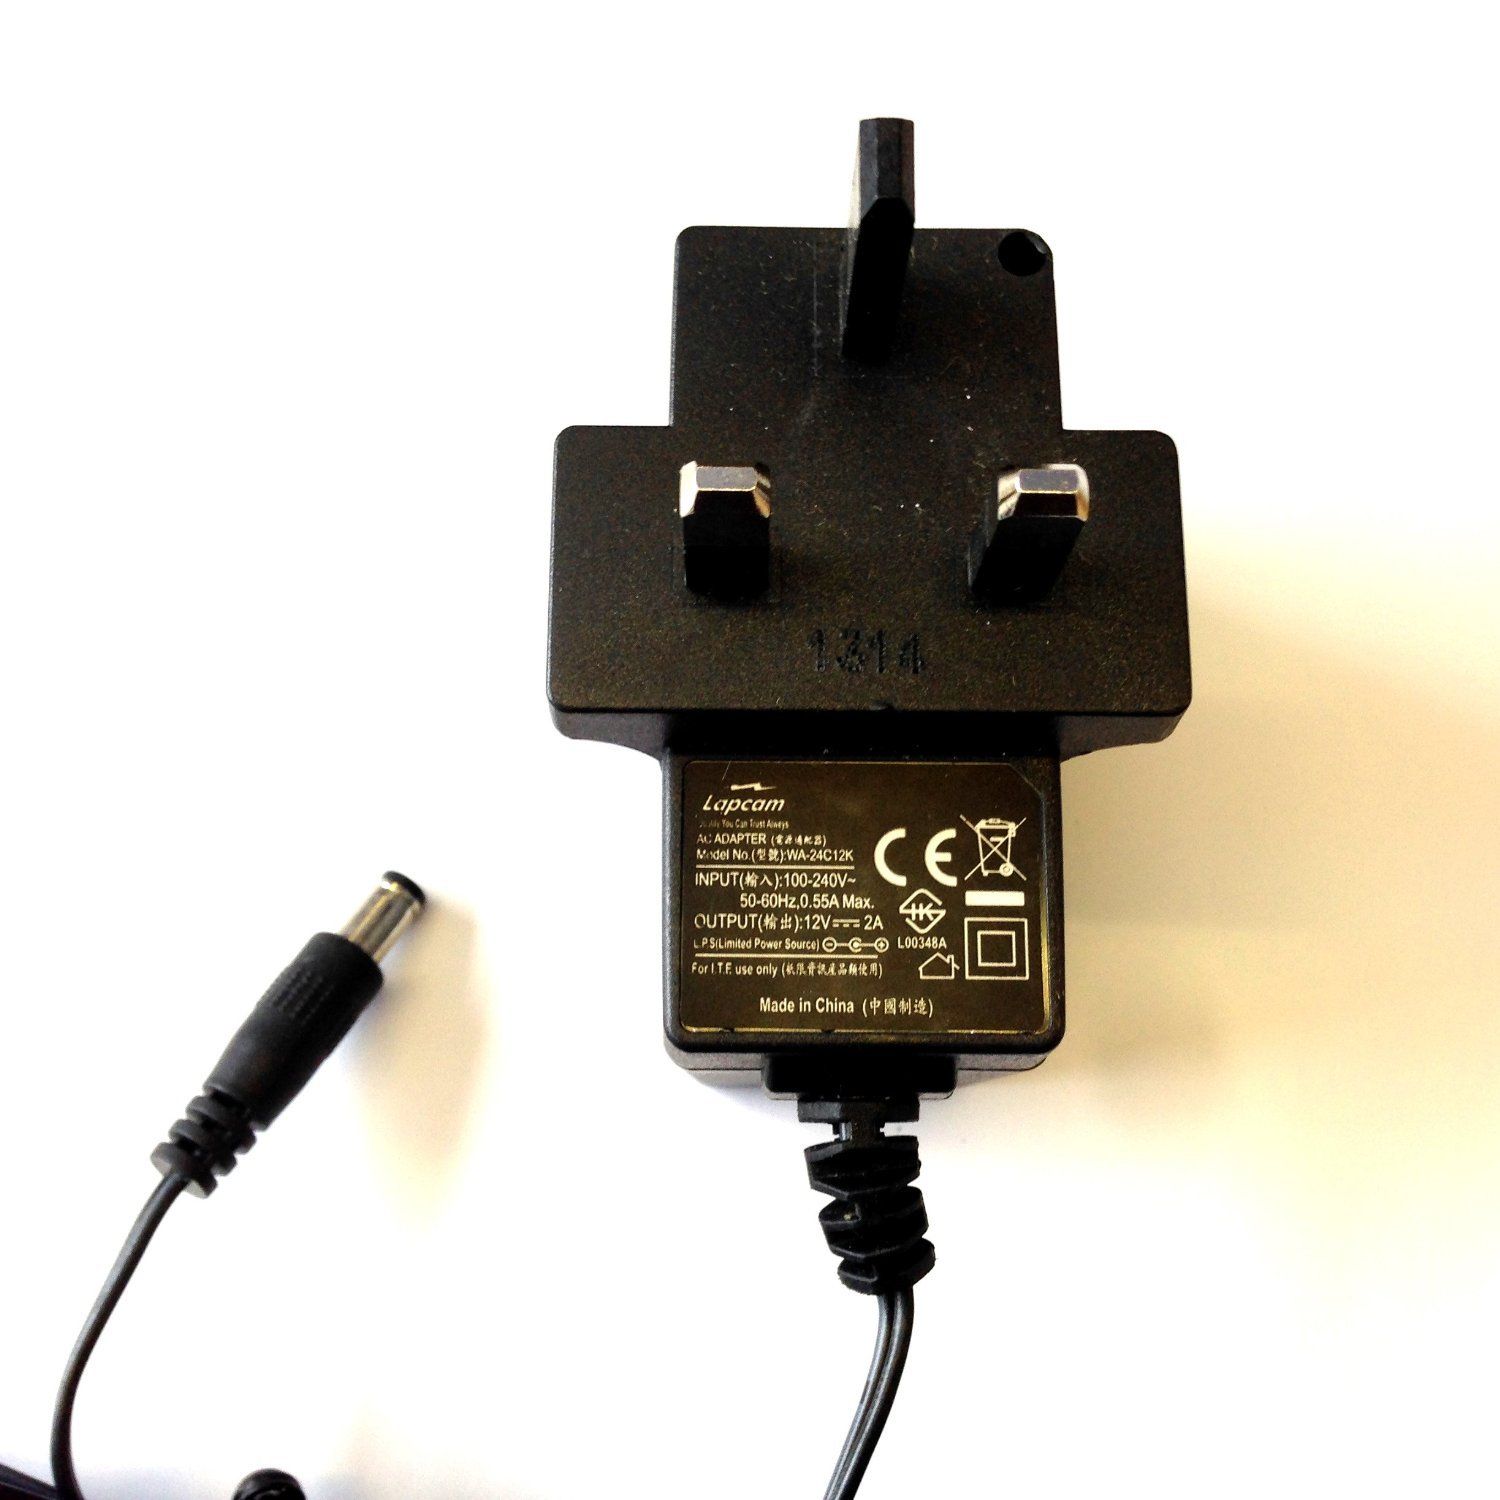 NEW Asian Power Devices WA-24C12K 12V 2A Wall Plug AC Power Adapter UK 5.5x2.5mm